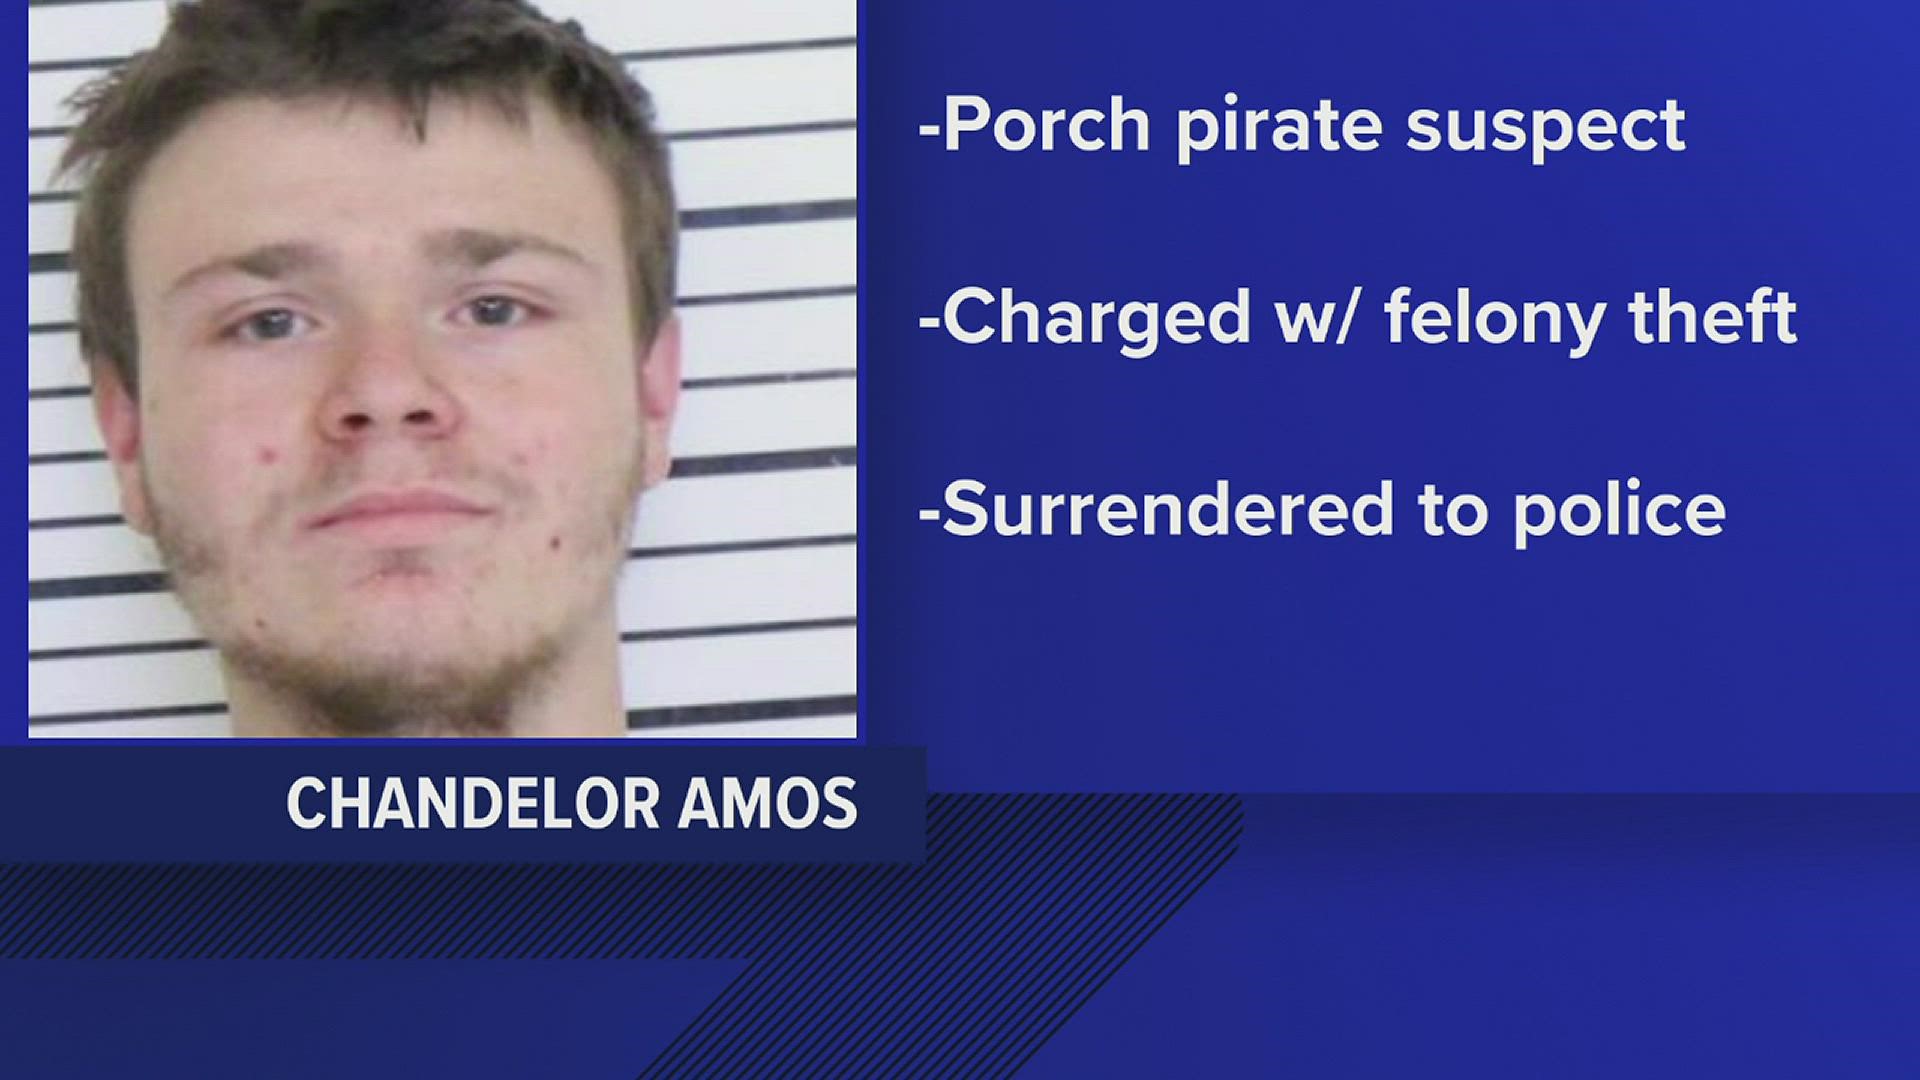 The suspect turned himself in on Wednesday after police released photos of the man in connection with over ten porch thefts and began a search.